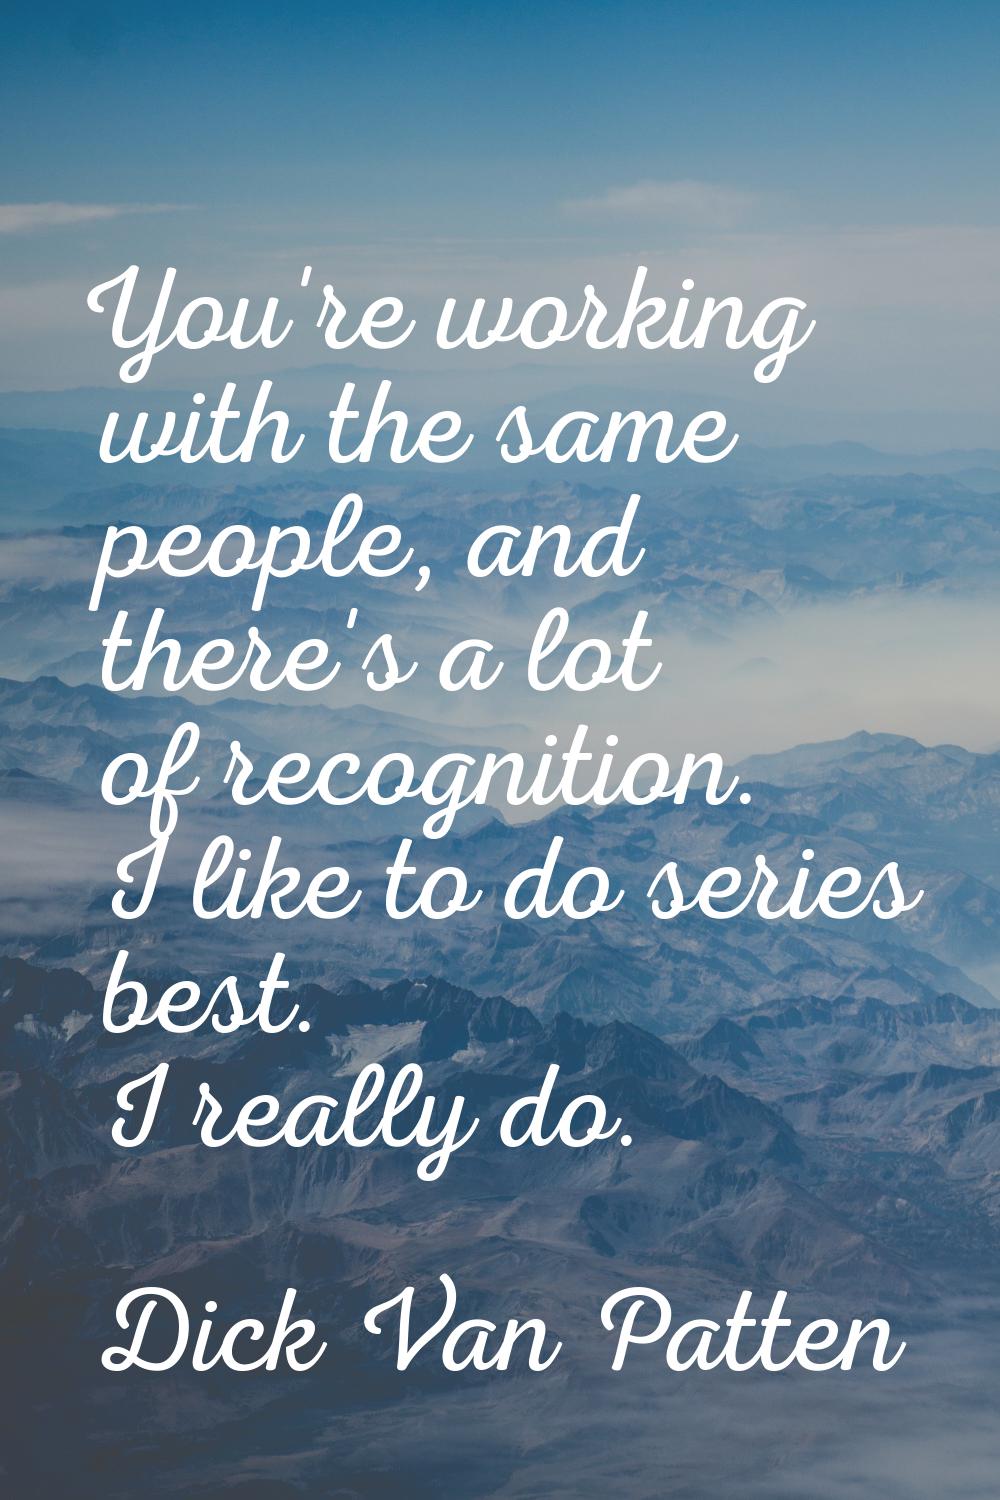 You're working with the same people, and there's a lot of recognition. I like to do series best. I 